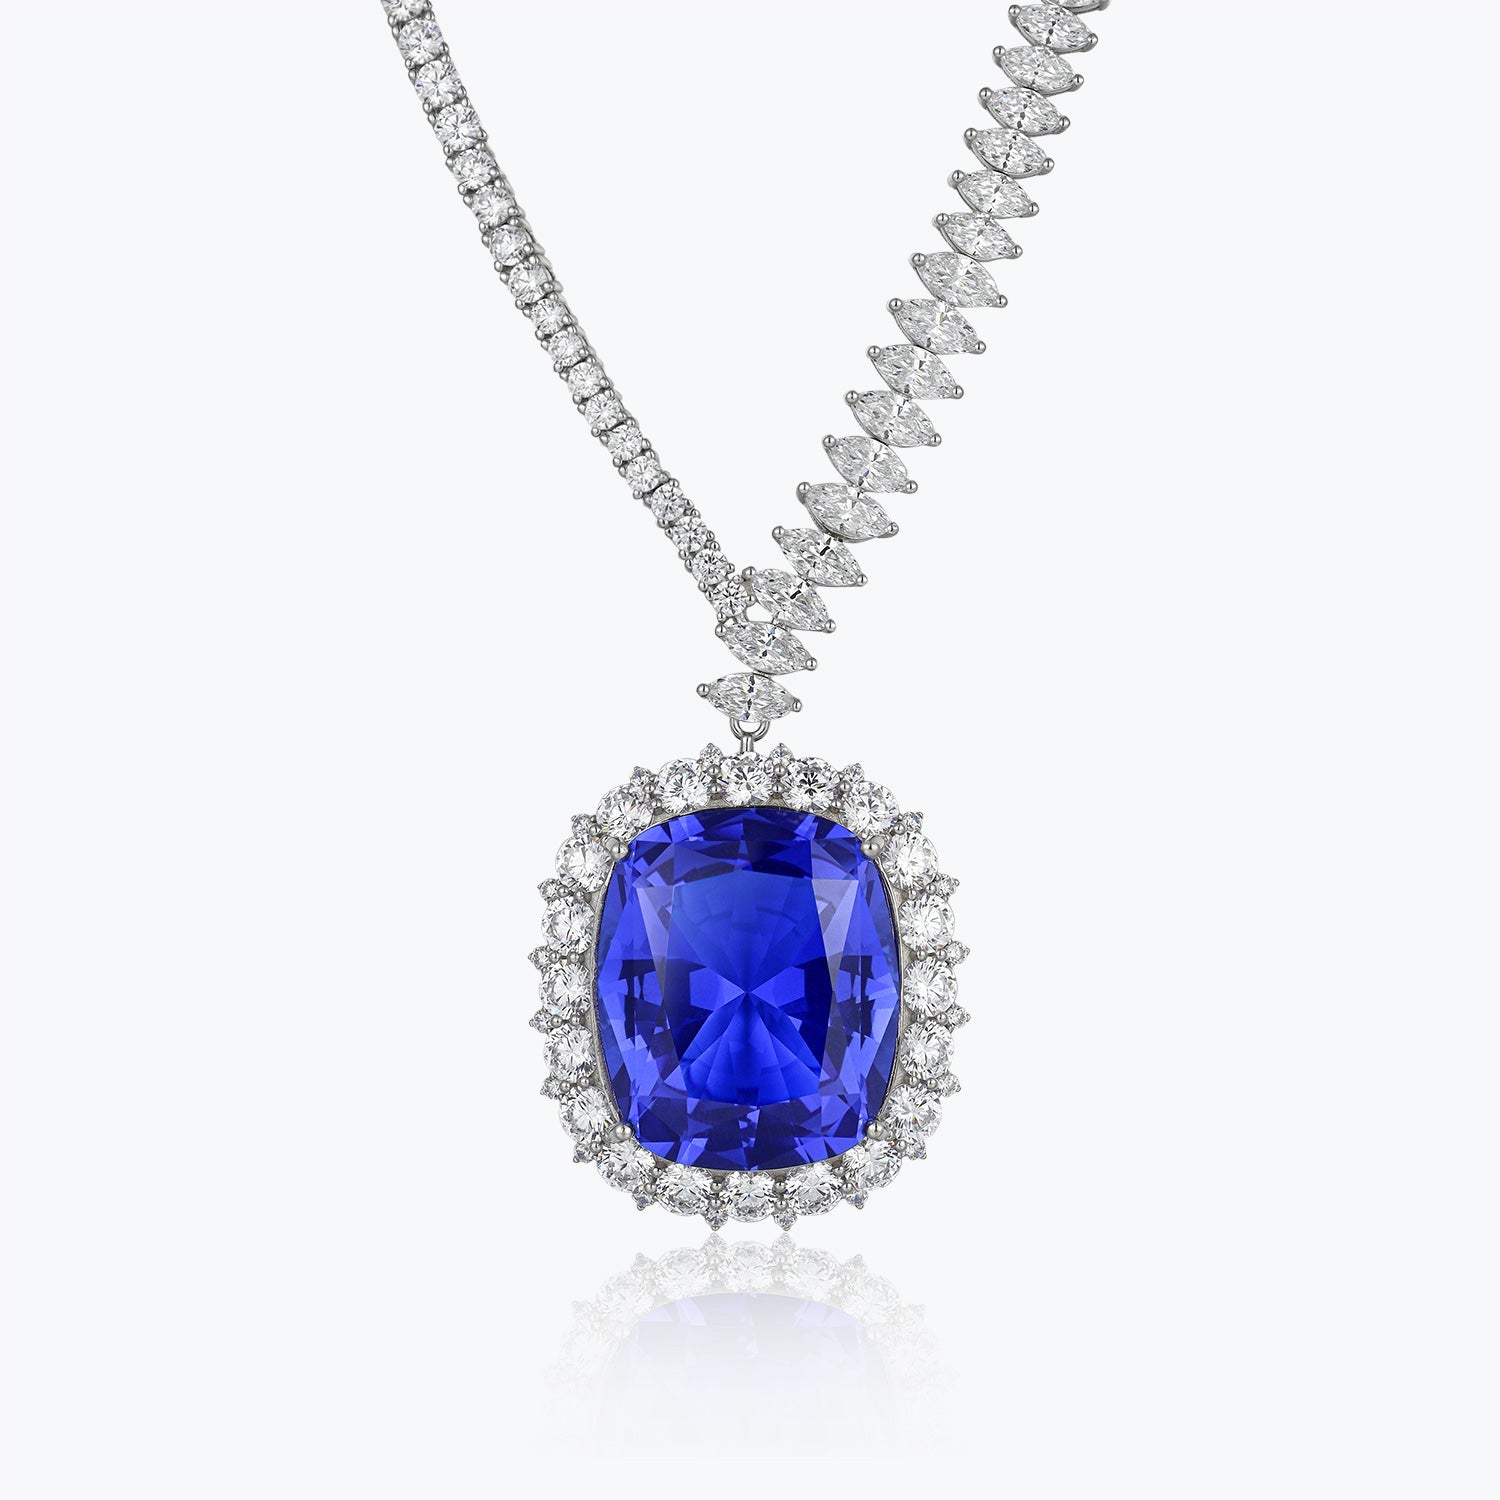 Oval Cut Royal Blue Sapphire Necklace&Pendant - dissoojewelry